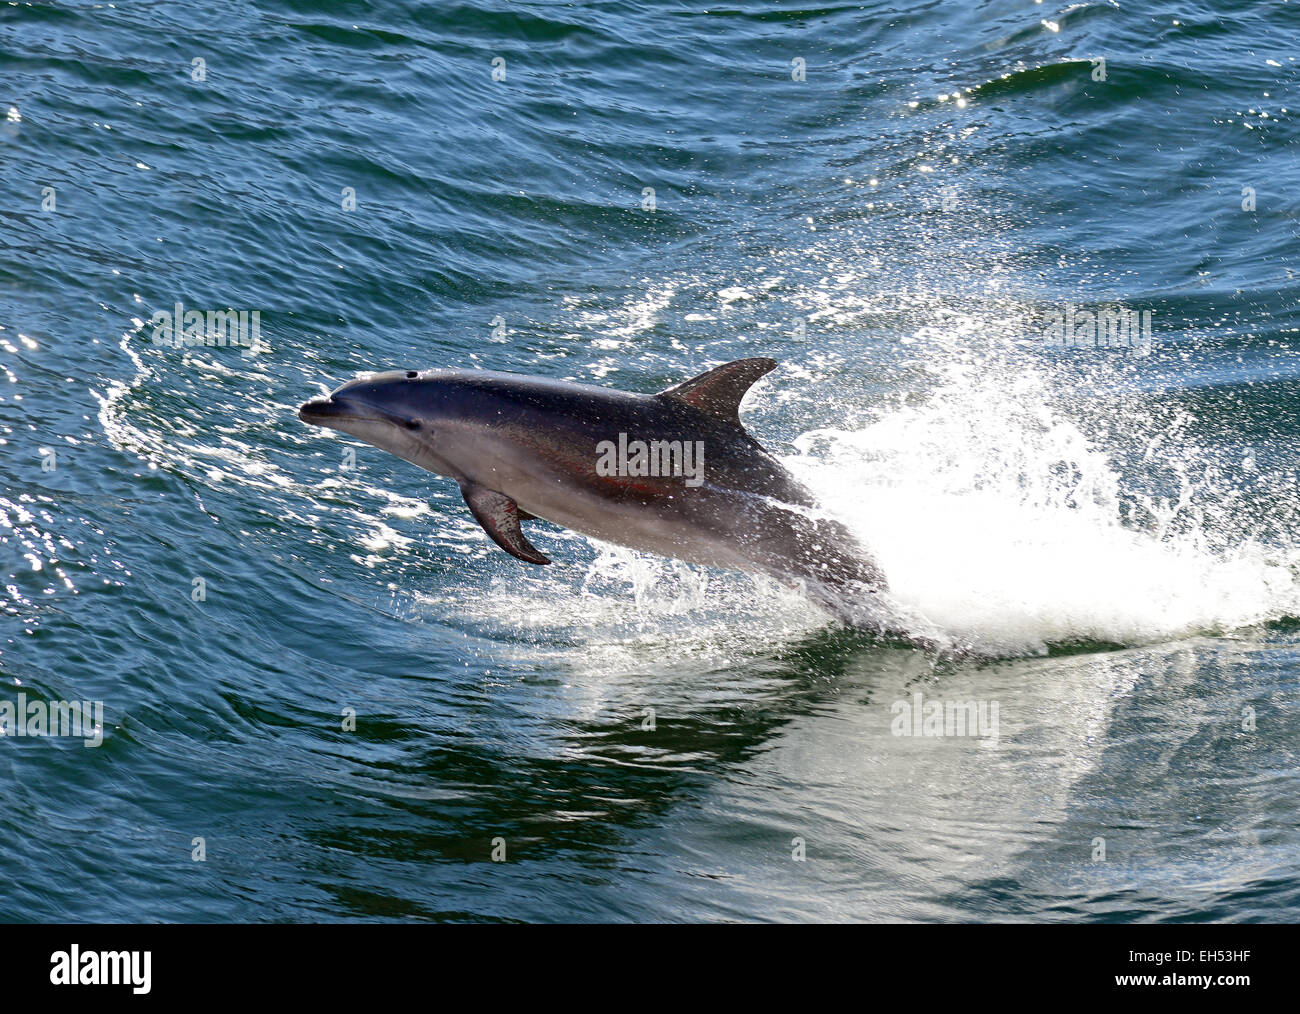 Dolphin jumps out of the water in Milford Sound, Fiordland, South Island, New Zealand. Stock Photo